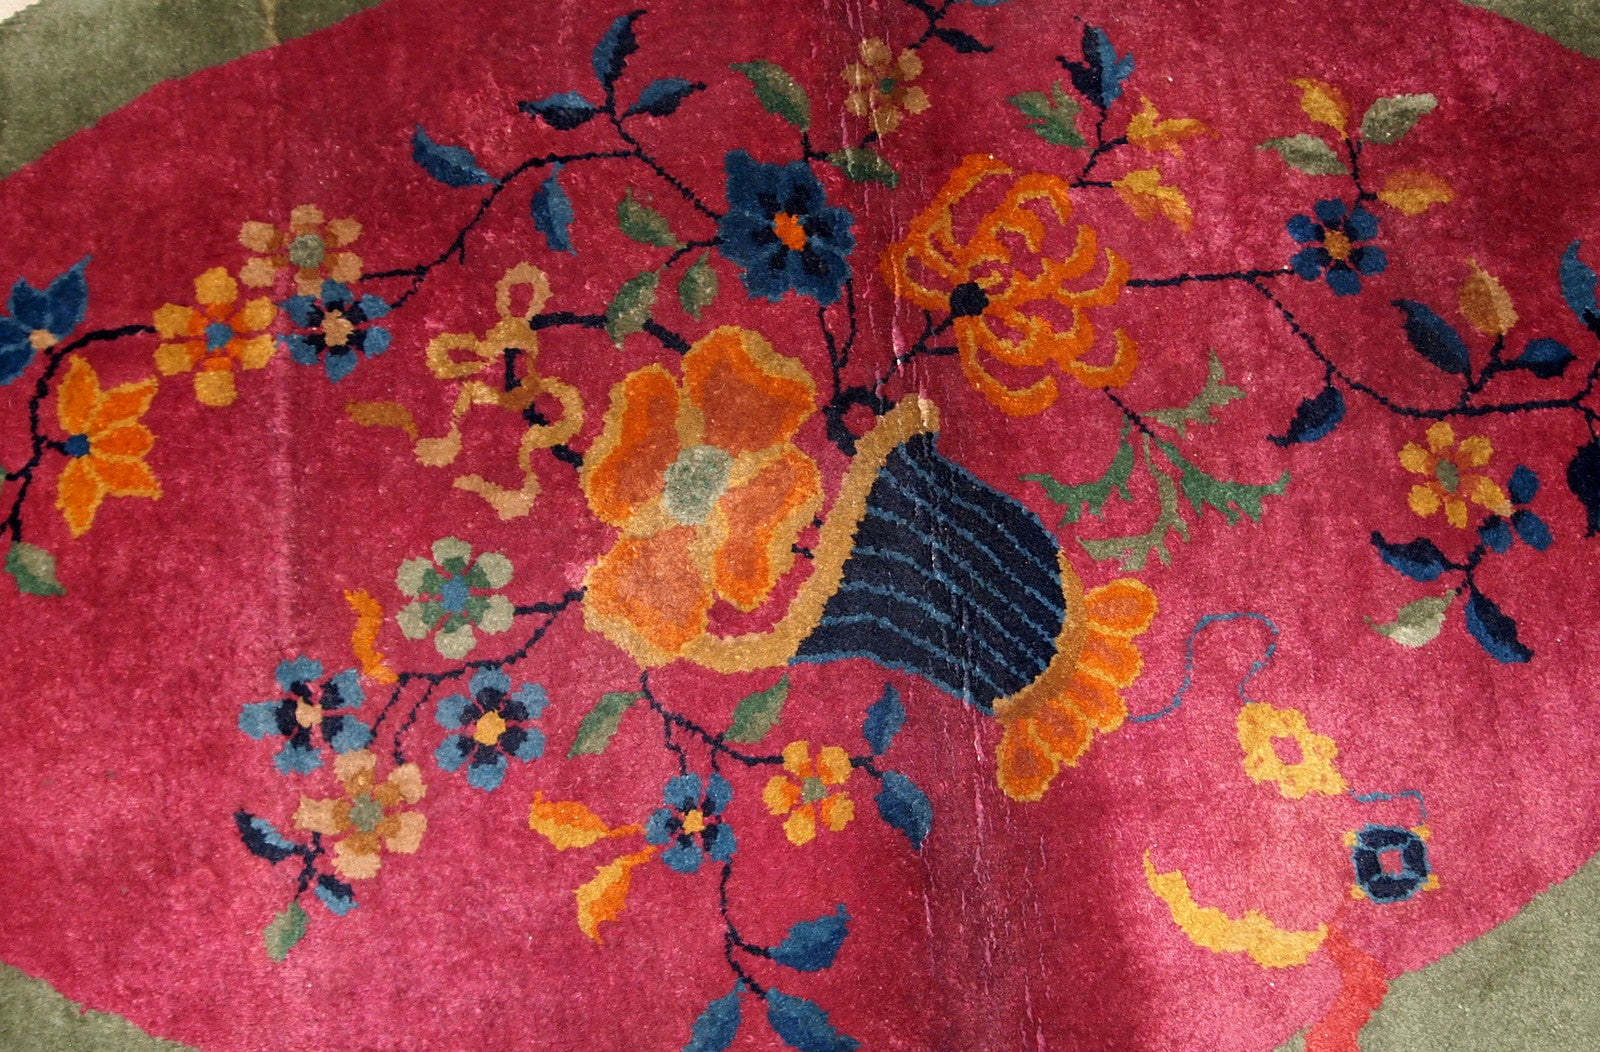 Handmade antique oval decorative rug from China in original good condition. The rug is in fuchsia and green shades.